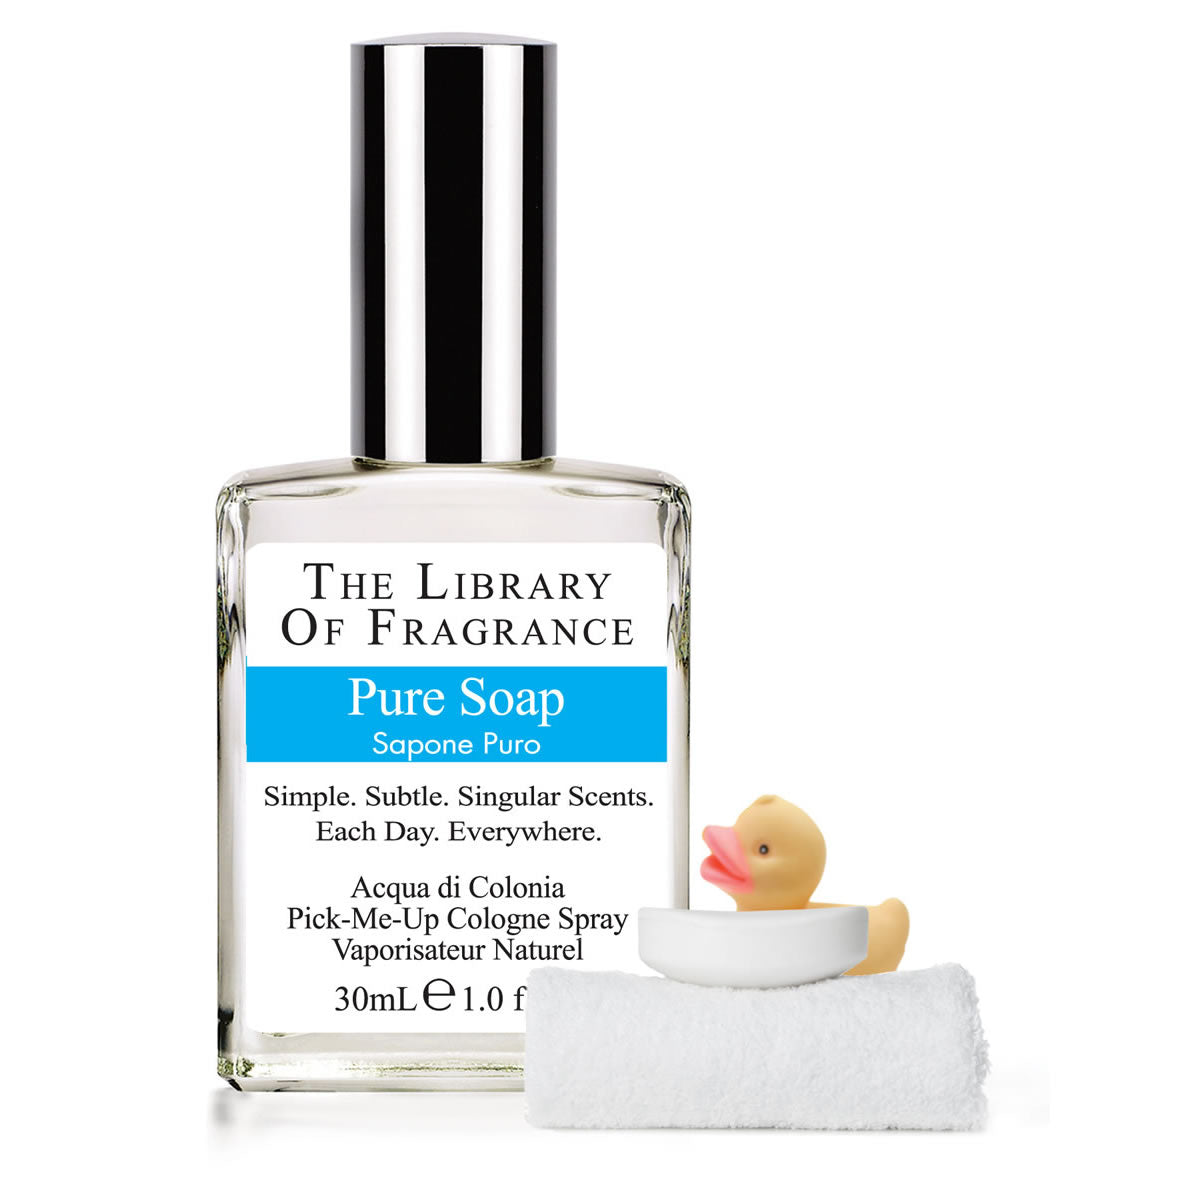 Profumo Pure Soap The Library of Fragrance